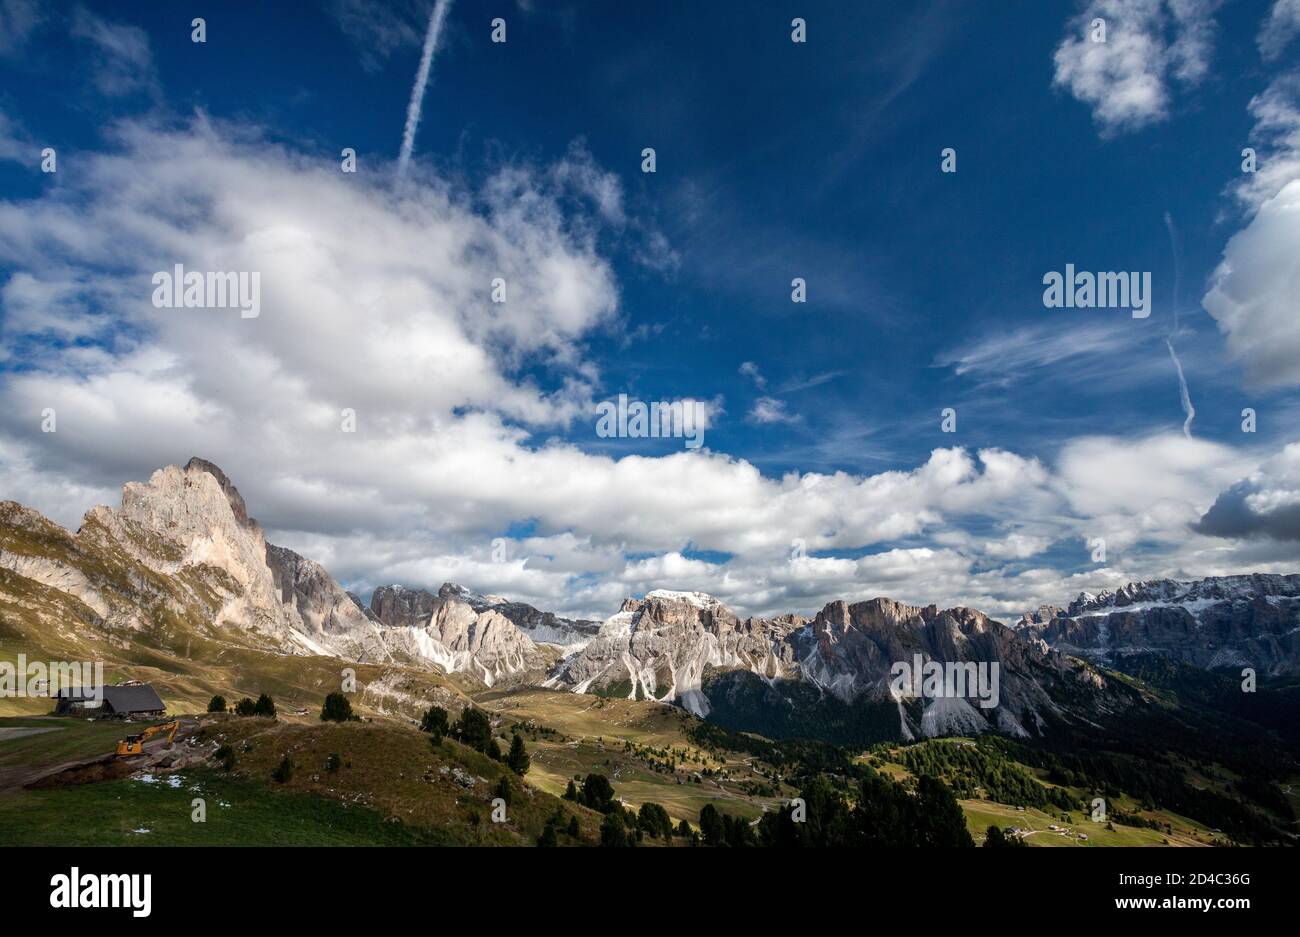 A view of the Italian Dolomites Geisler group of peaks, with places to stay scattered through the valley, reachable from the Furnes-Seceda cableway Stock Photo